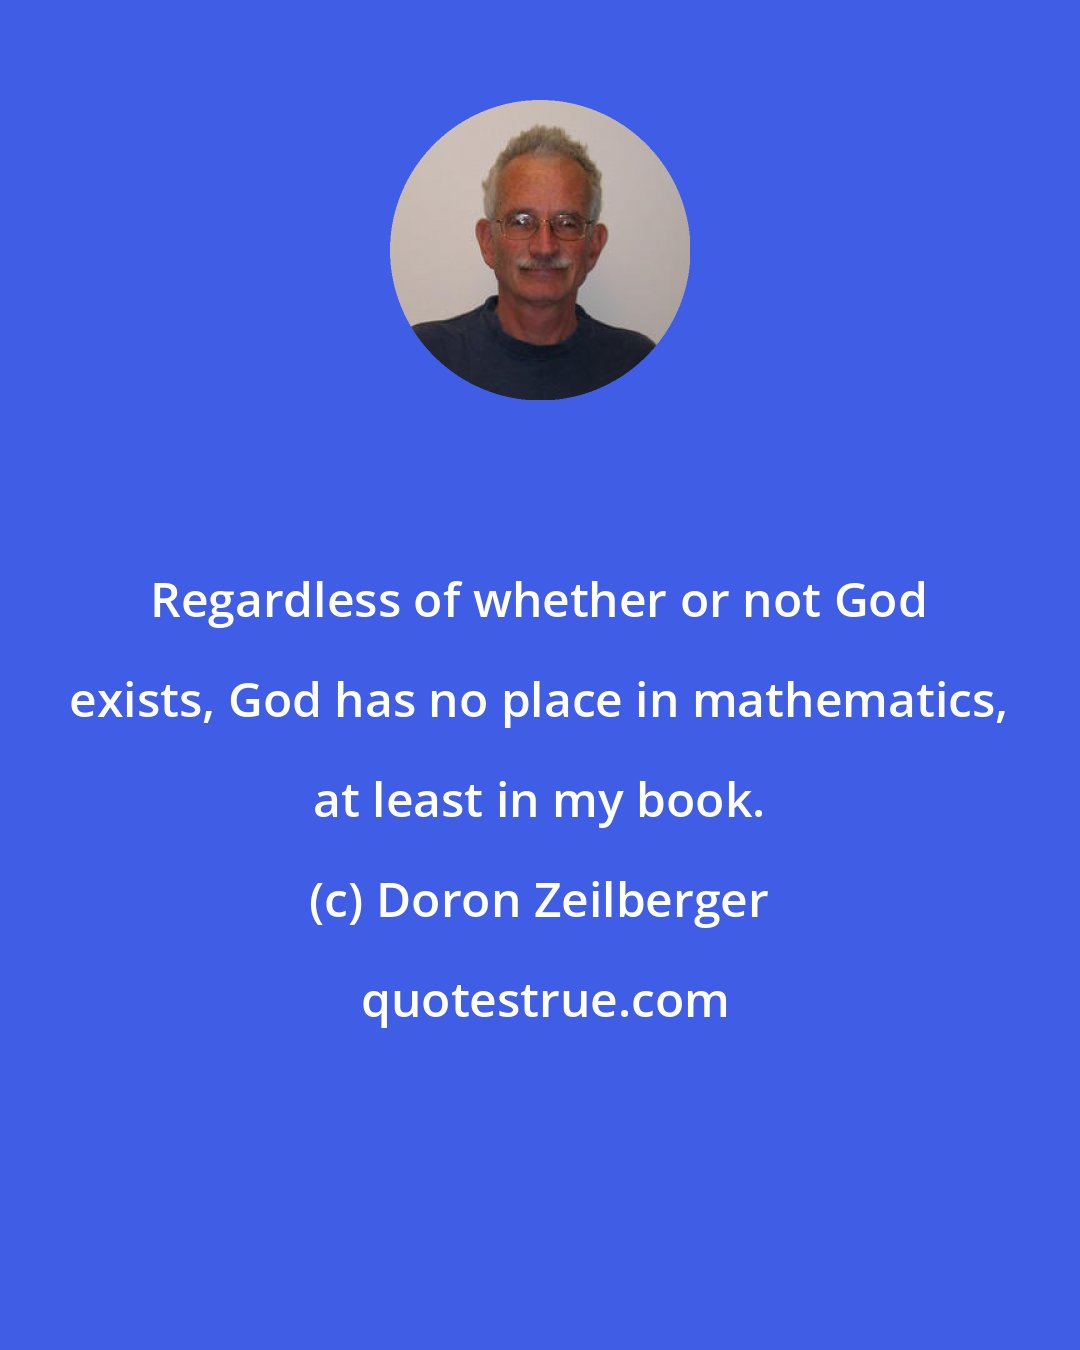 Doron Zeilberger: Regardless of whether or not God exists, God has no place in mathematics, at least in my book.